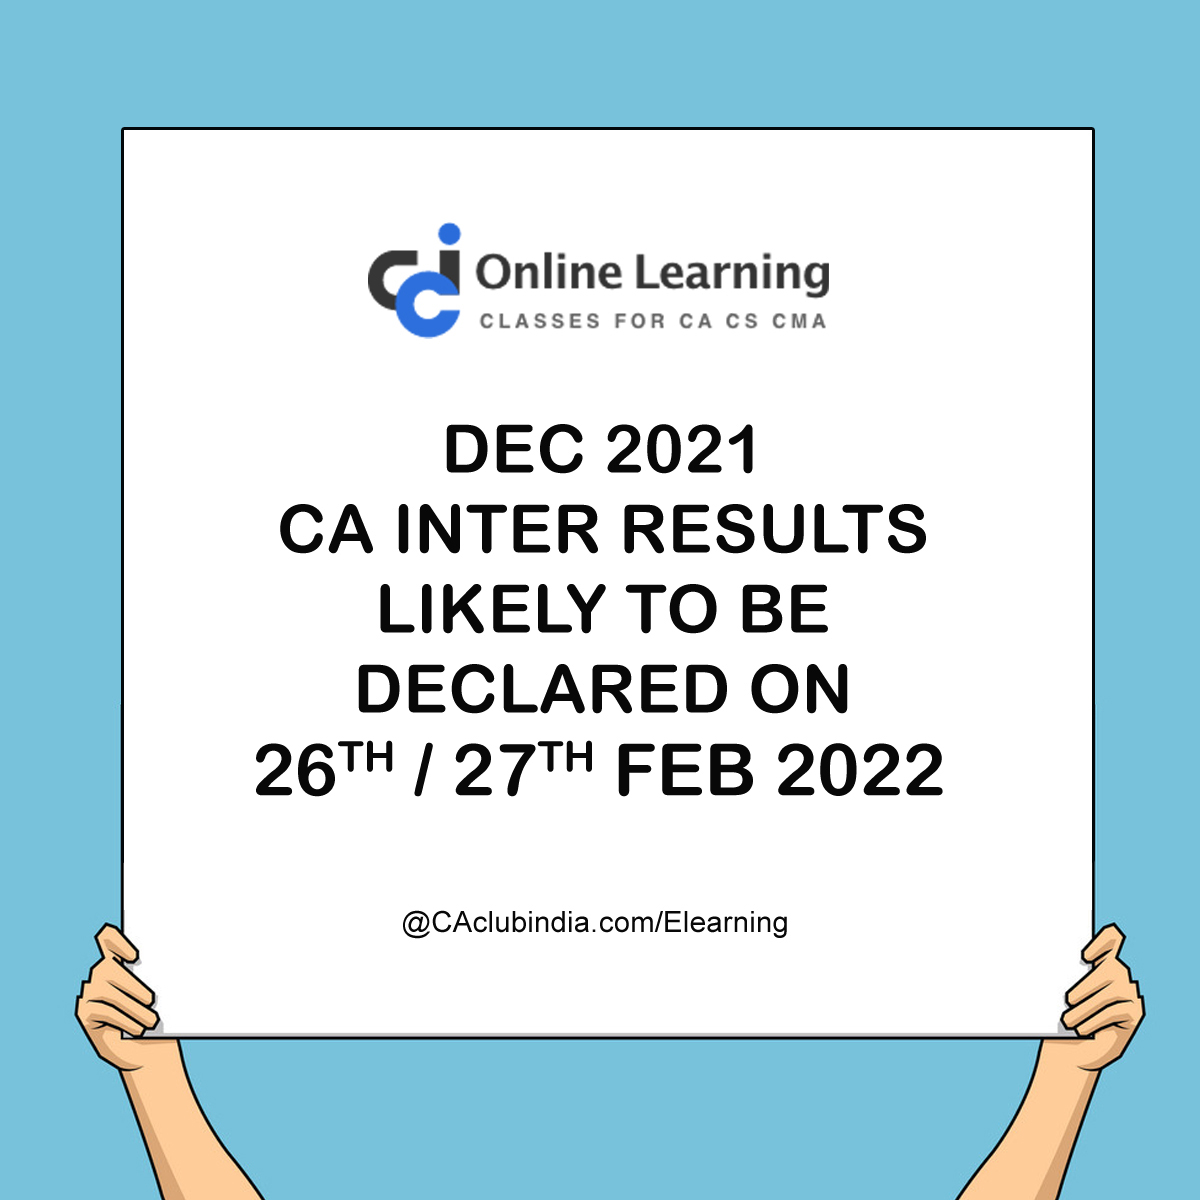 Dec 21 CA Inter Results likely to be declared on 26th or 27th February 2022